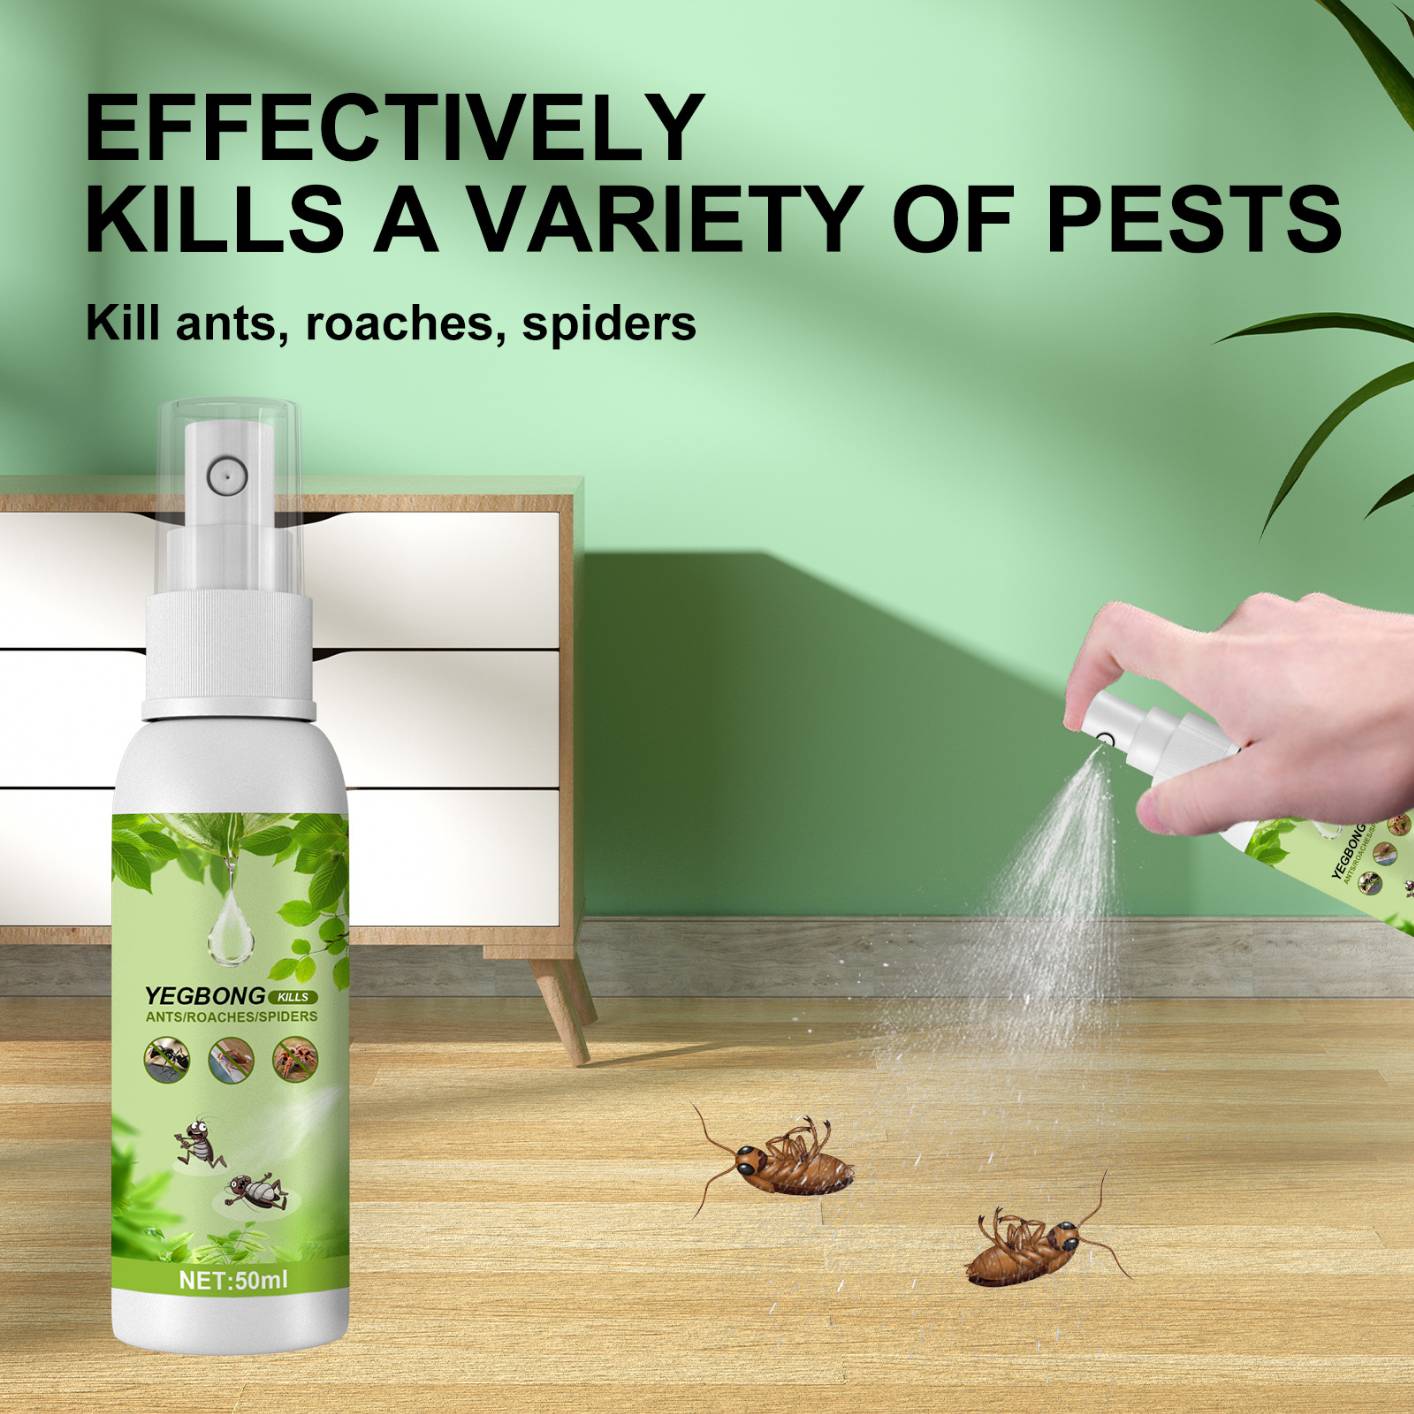 Mosquito, Tick, Fly, and Insect Repellent with Natural Essential Oils -Plant-Based Bug Spray and Killer - Safe for Kids, Babies, and Family